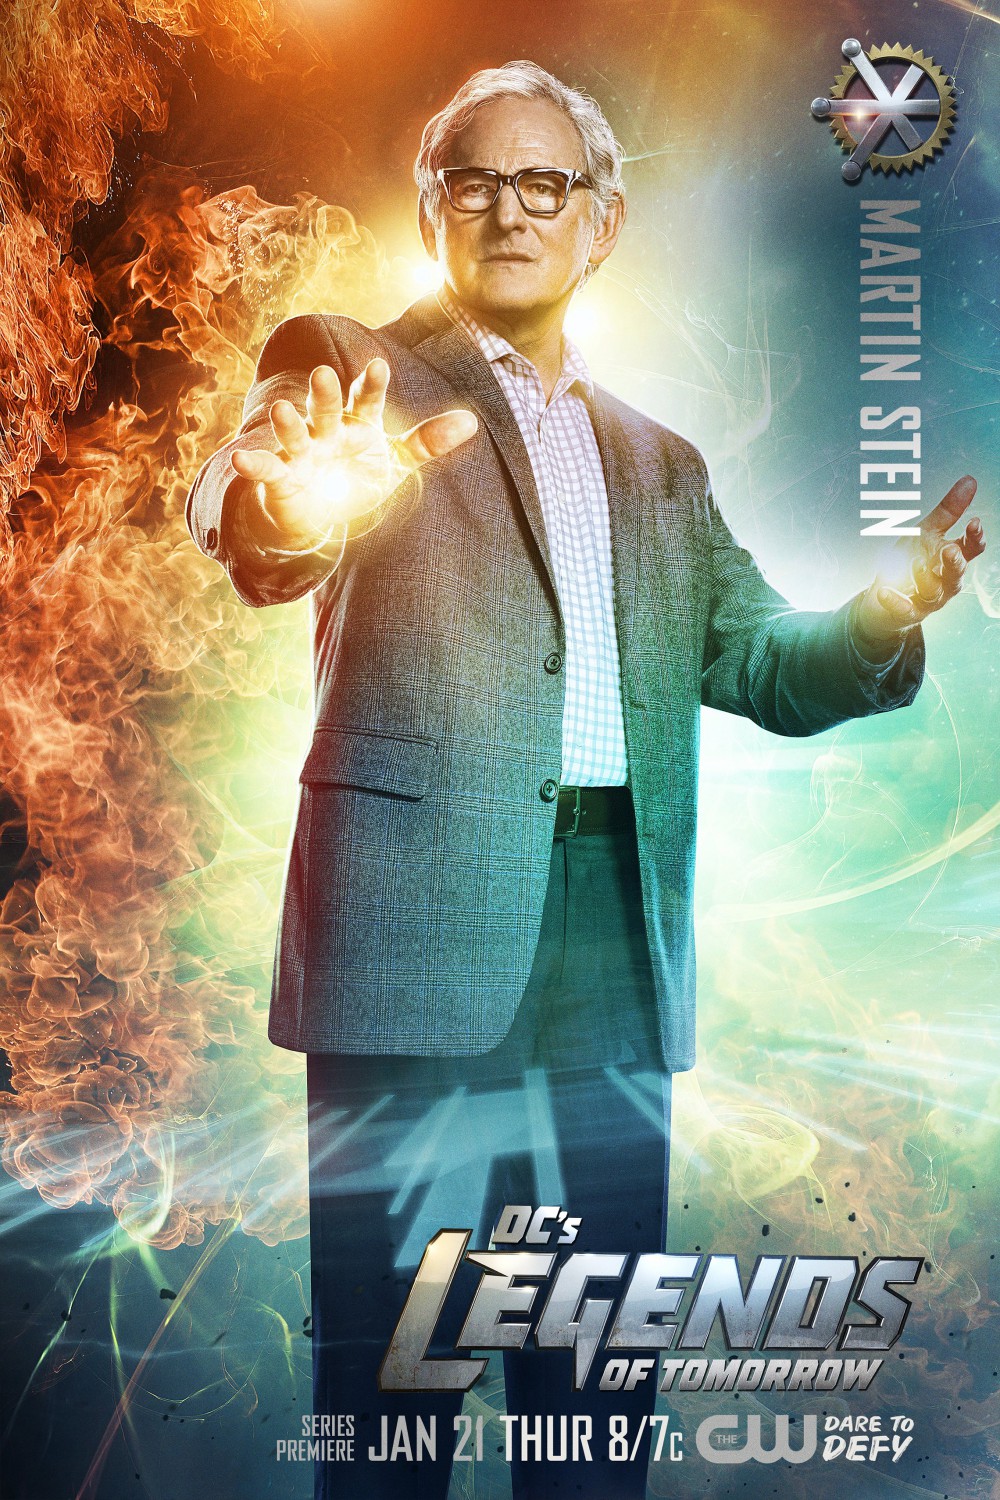 Extra Large Movie Poster Image for Legends of Tomorrow (#3 of 28)